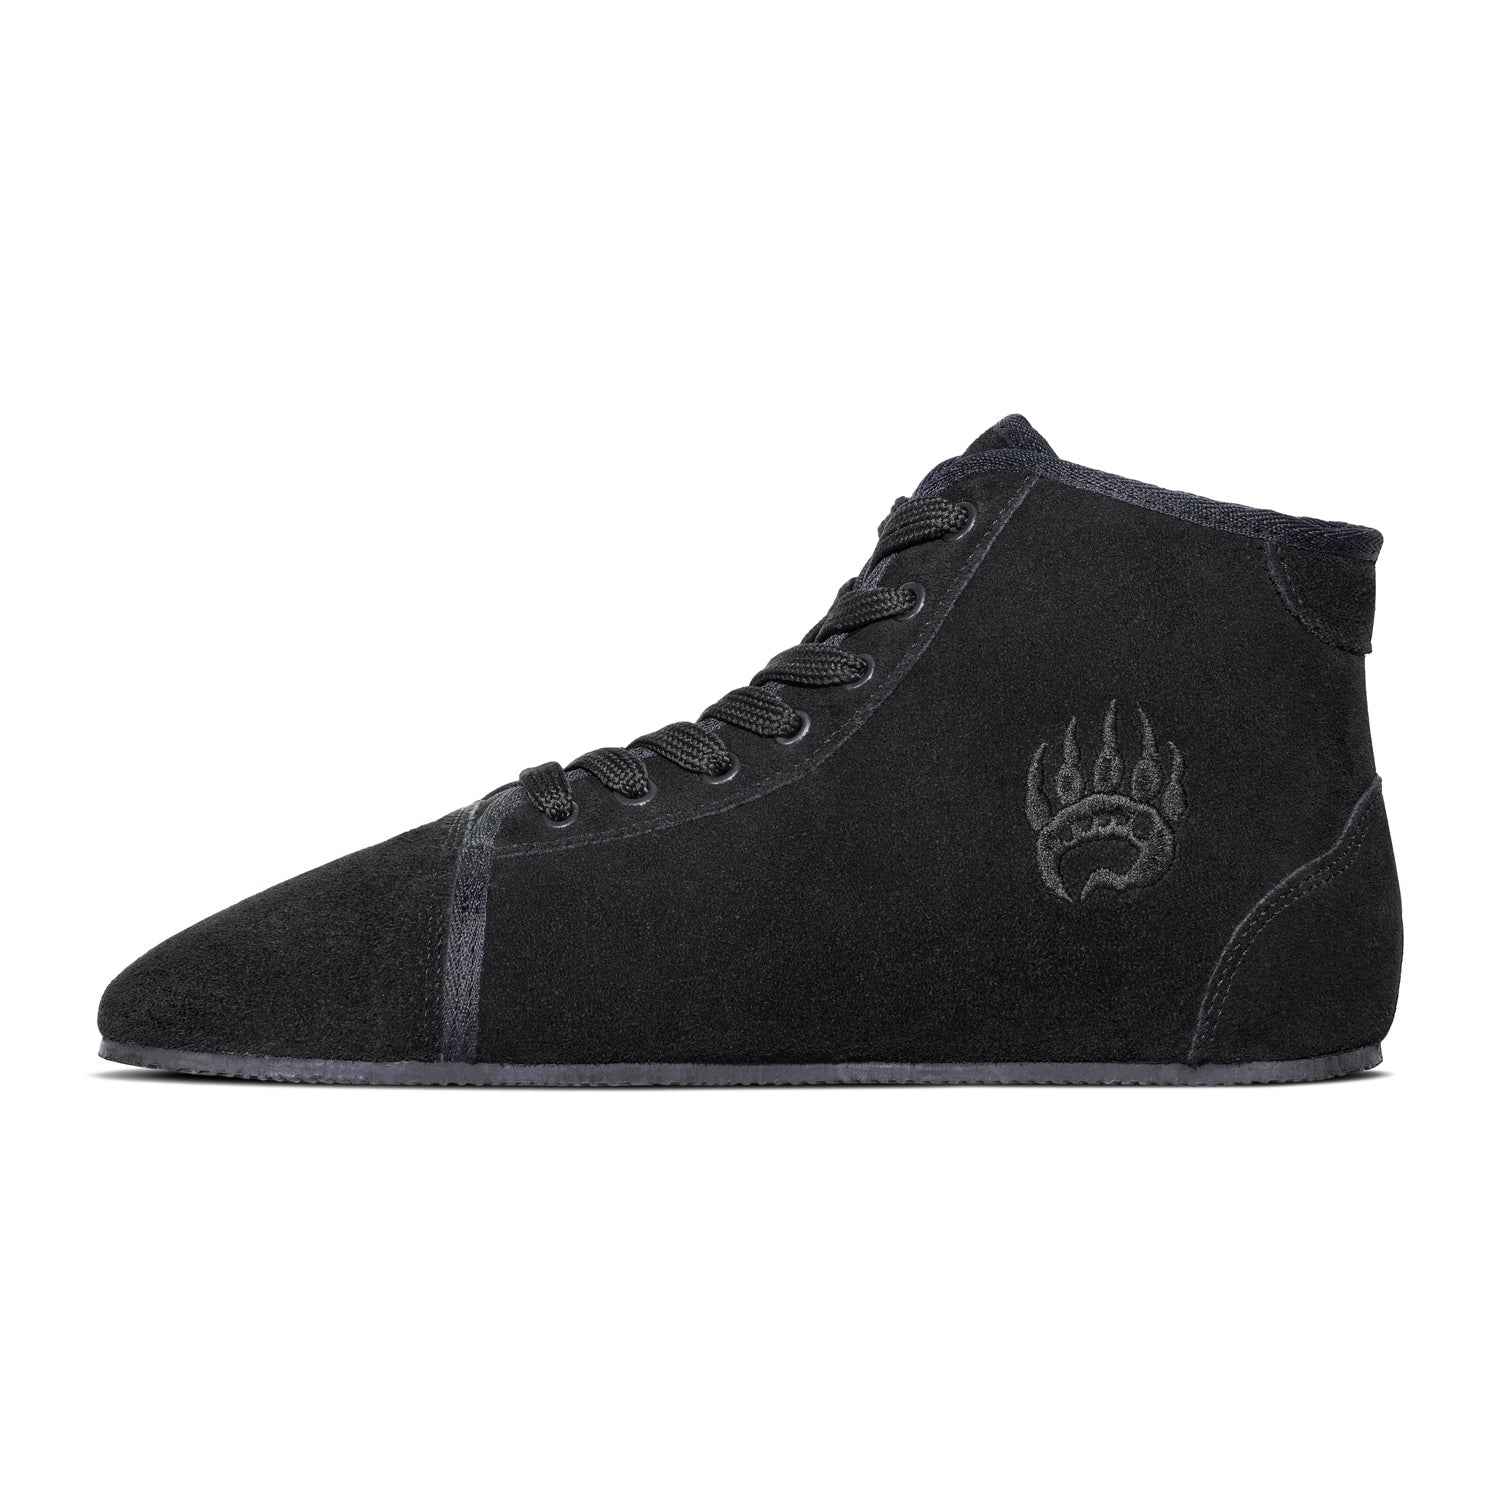 Side profile of the Bearfoot Ursus Suede High-Top, a training sneaker in charcoal black with laces and a unique, bear paw logo imprinted near the ankle area.